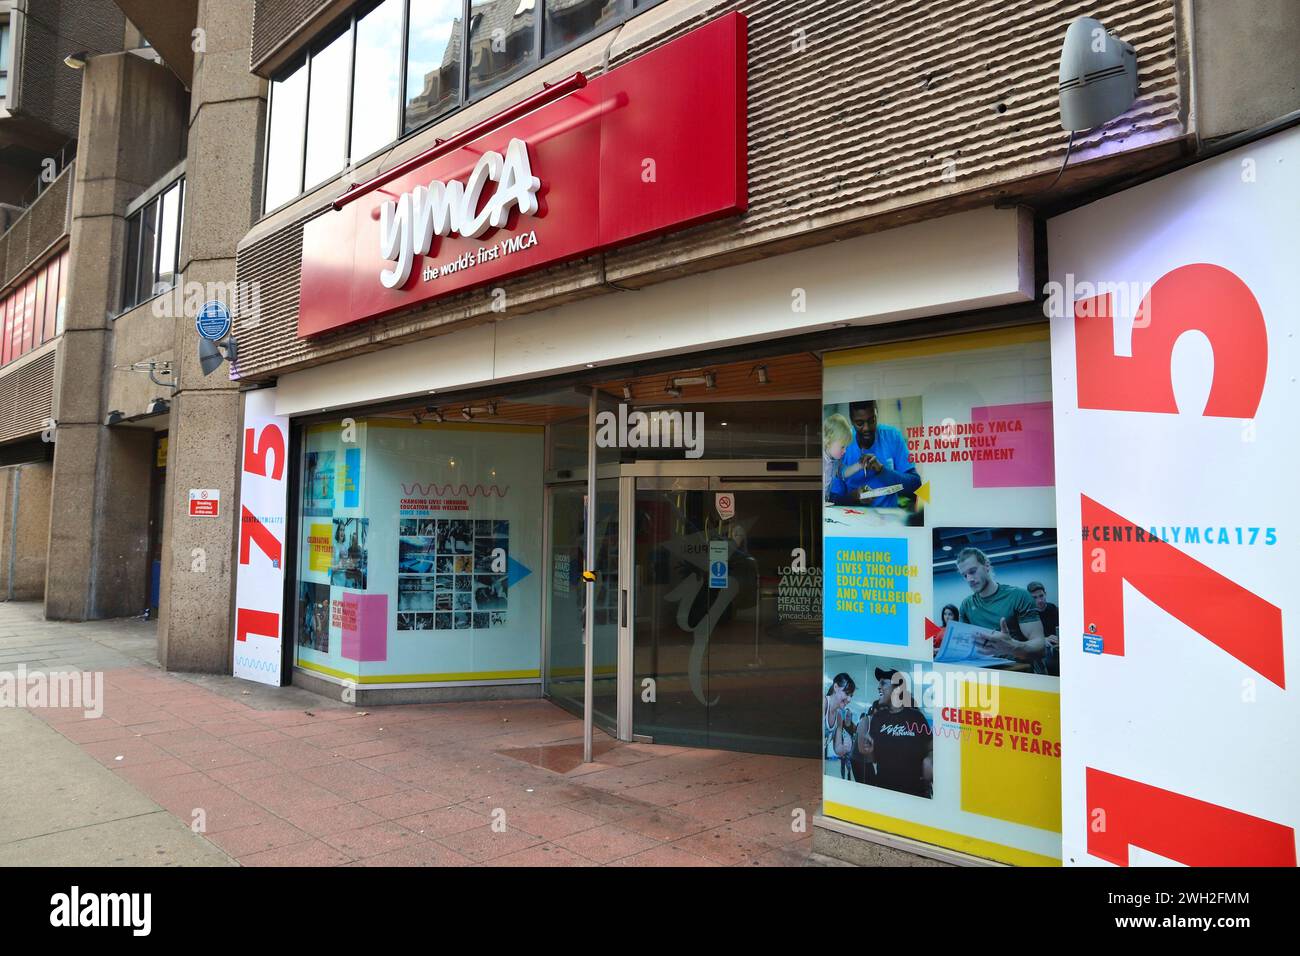 LONDON, UK - JULY 14, 2019: YMCA office in London. YMCA, Young Men’s Christian Association was founded in London. Stock Photo